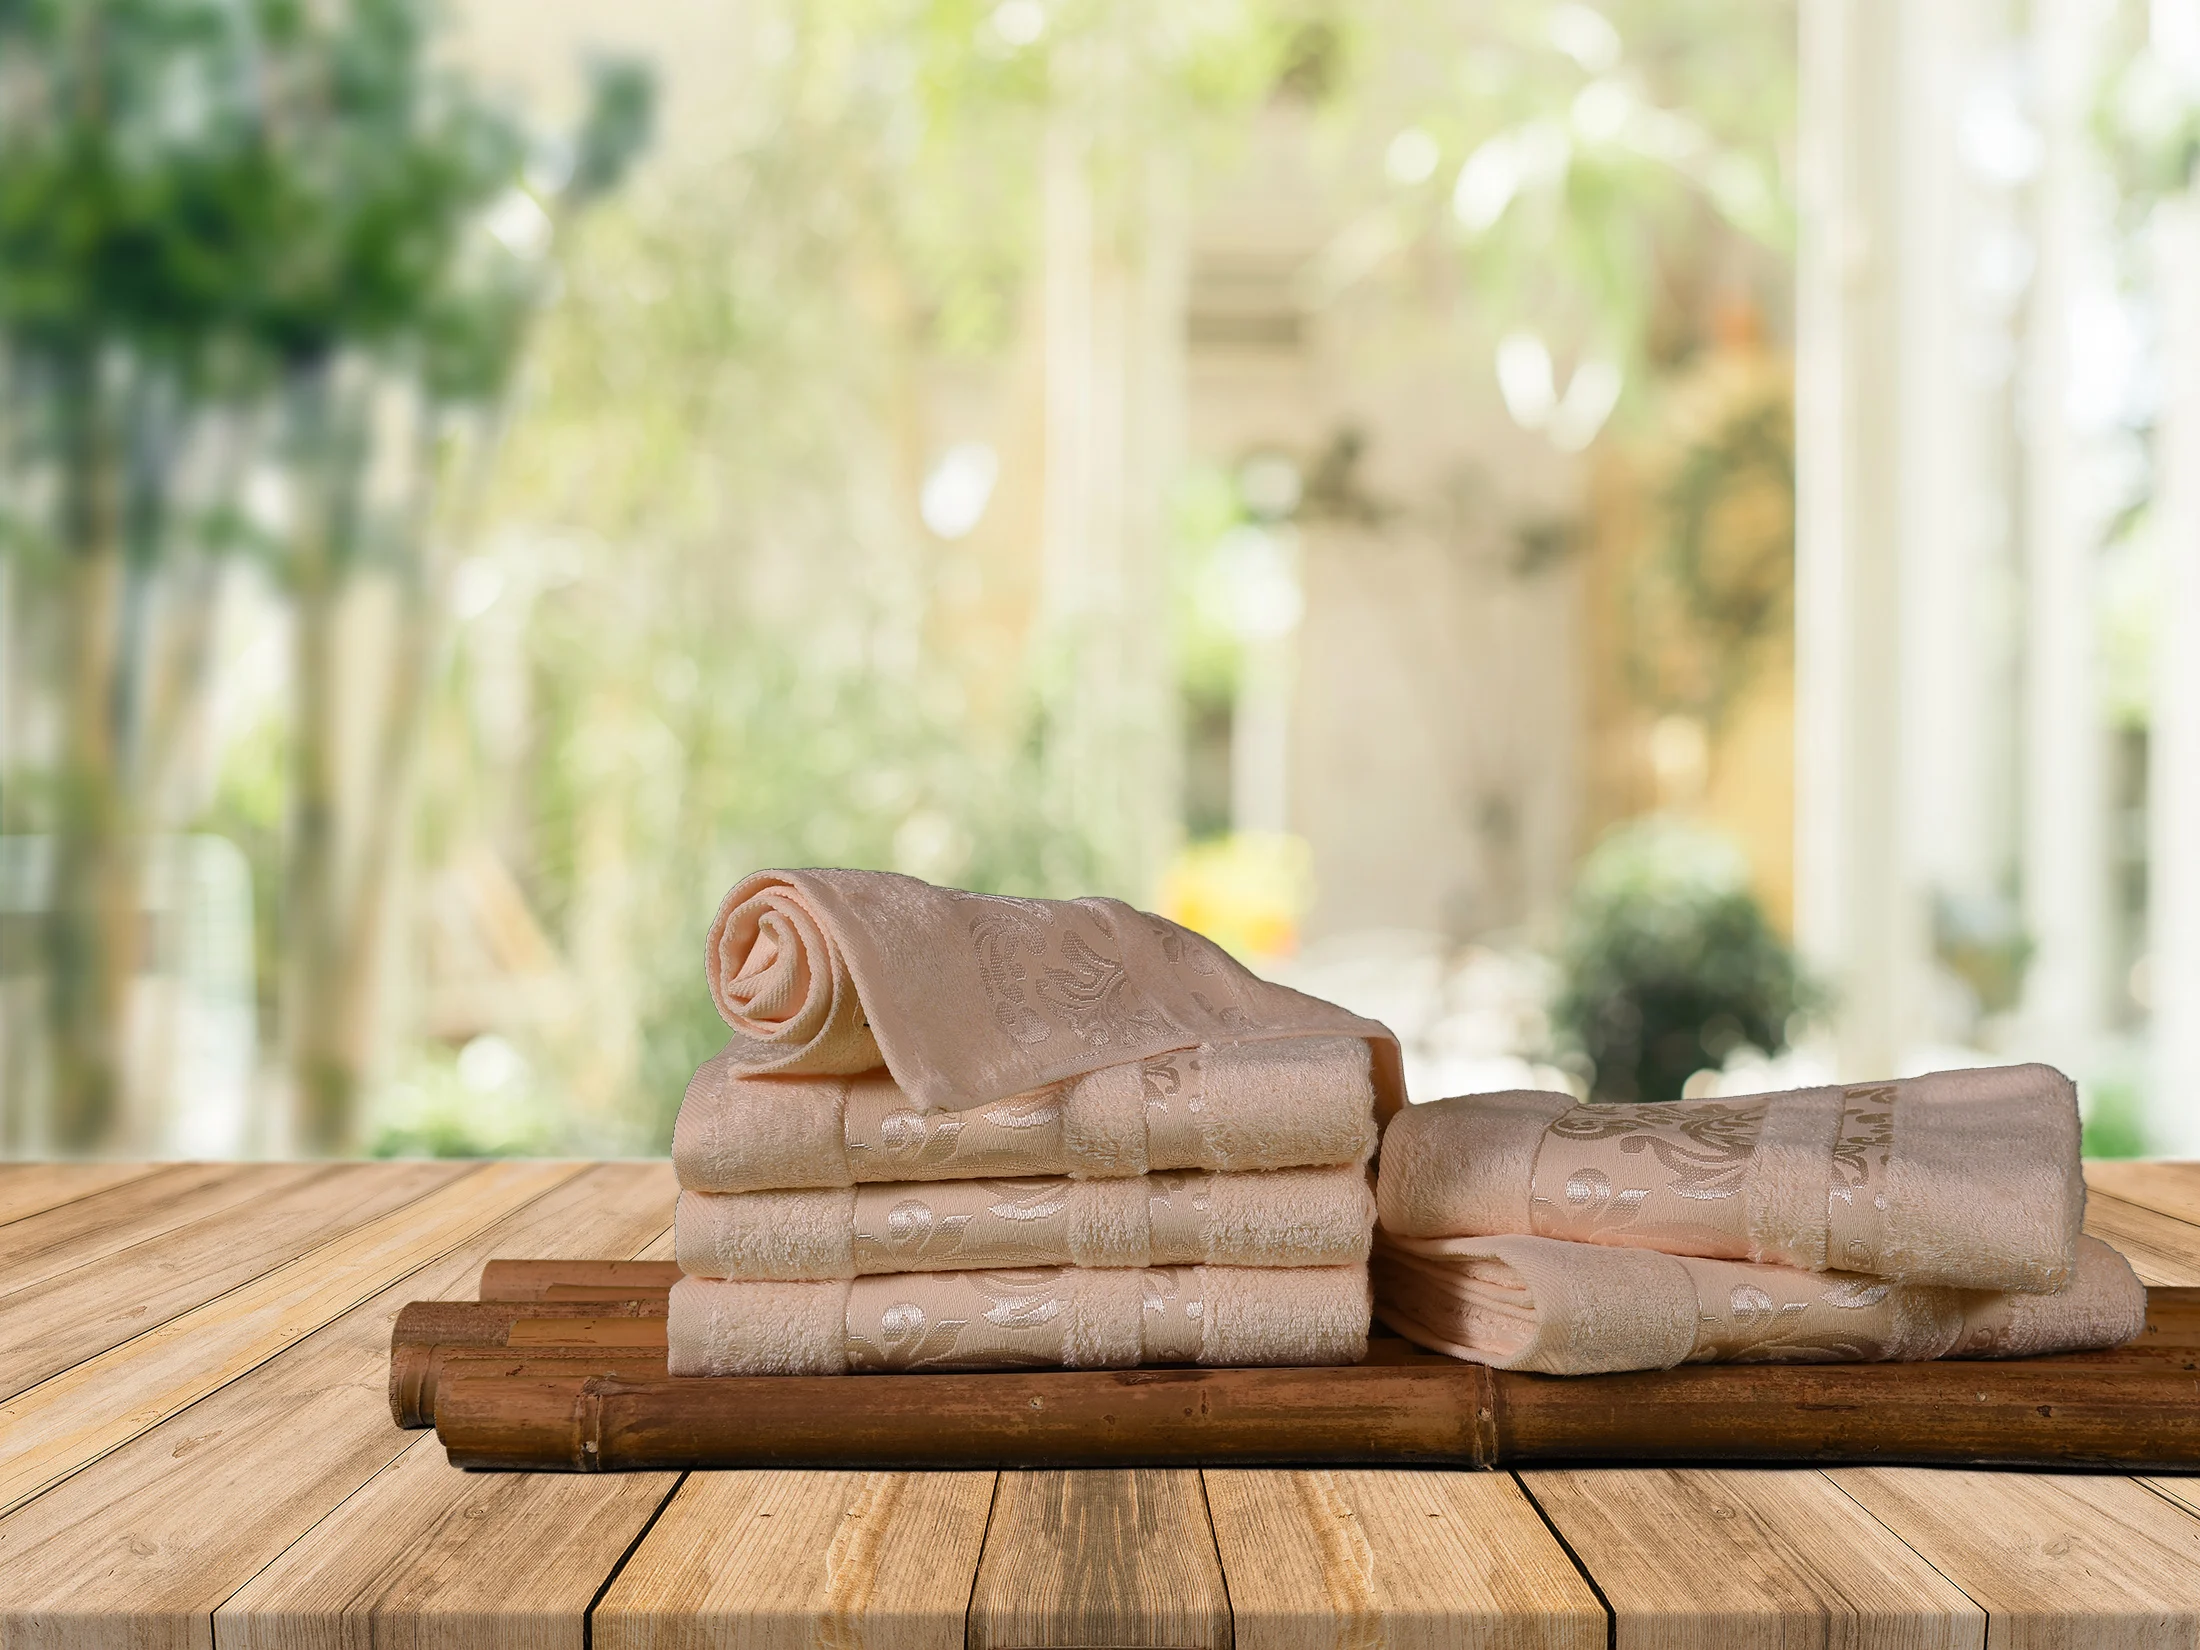 

Bamboo & Turkish Cotton -Pack of 6 50x90 Hand Towels, Bamboo, Organic, Natural, Luxury, Odor Resistant, Highly Absorbent,